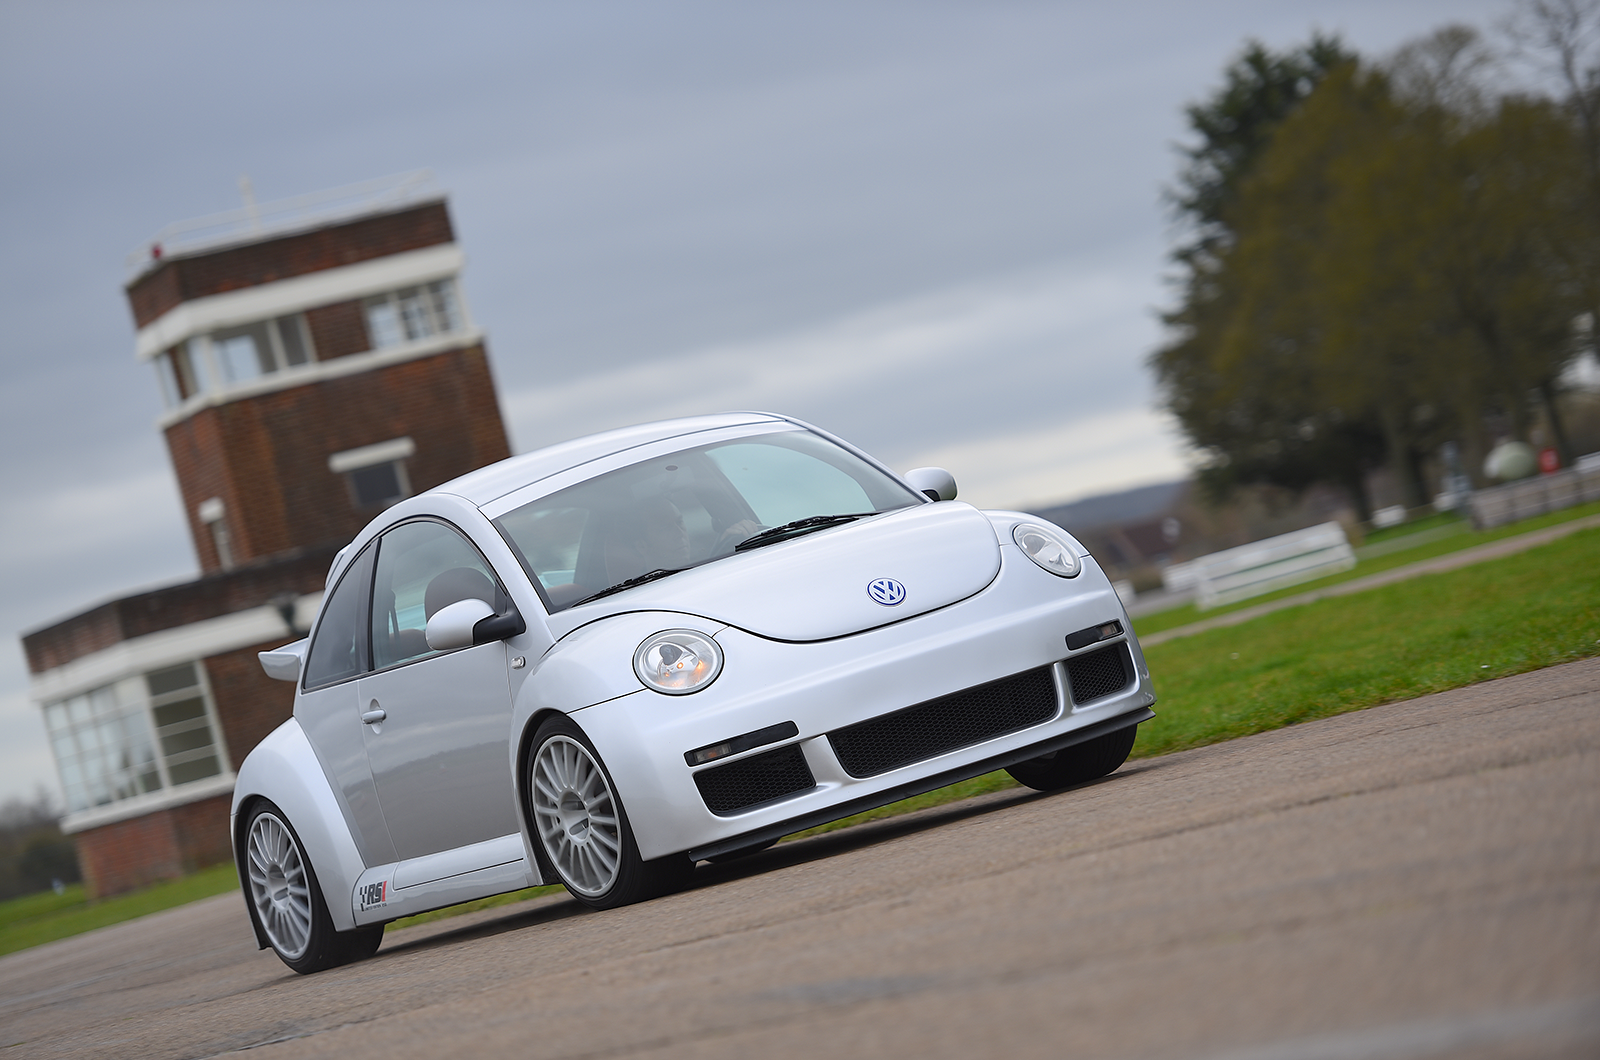 Classic & Sports Car – Unhinged hatches: Volkswagen Beetle RSI vs Renault Clio V6